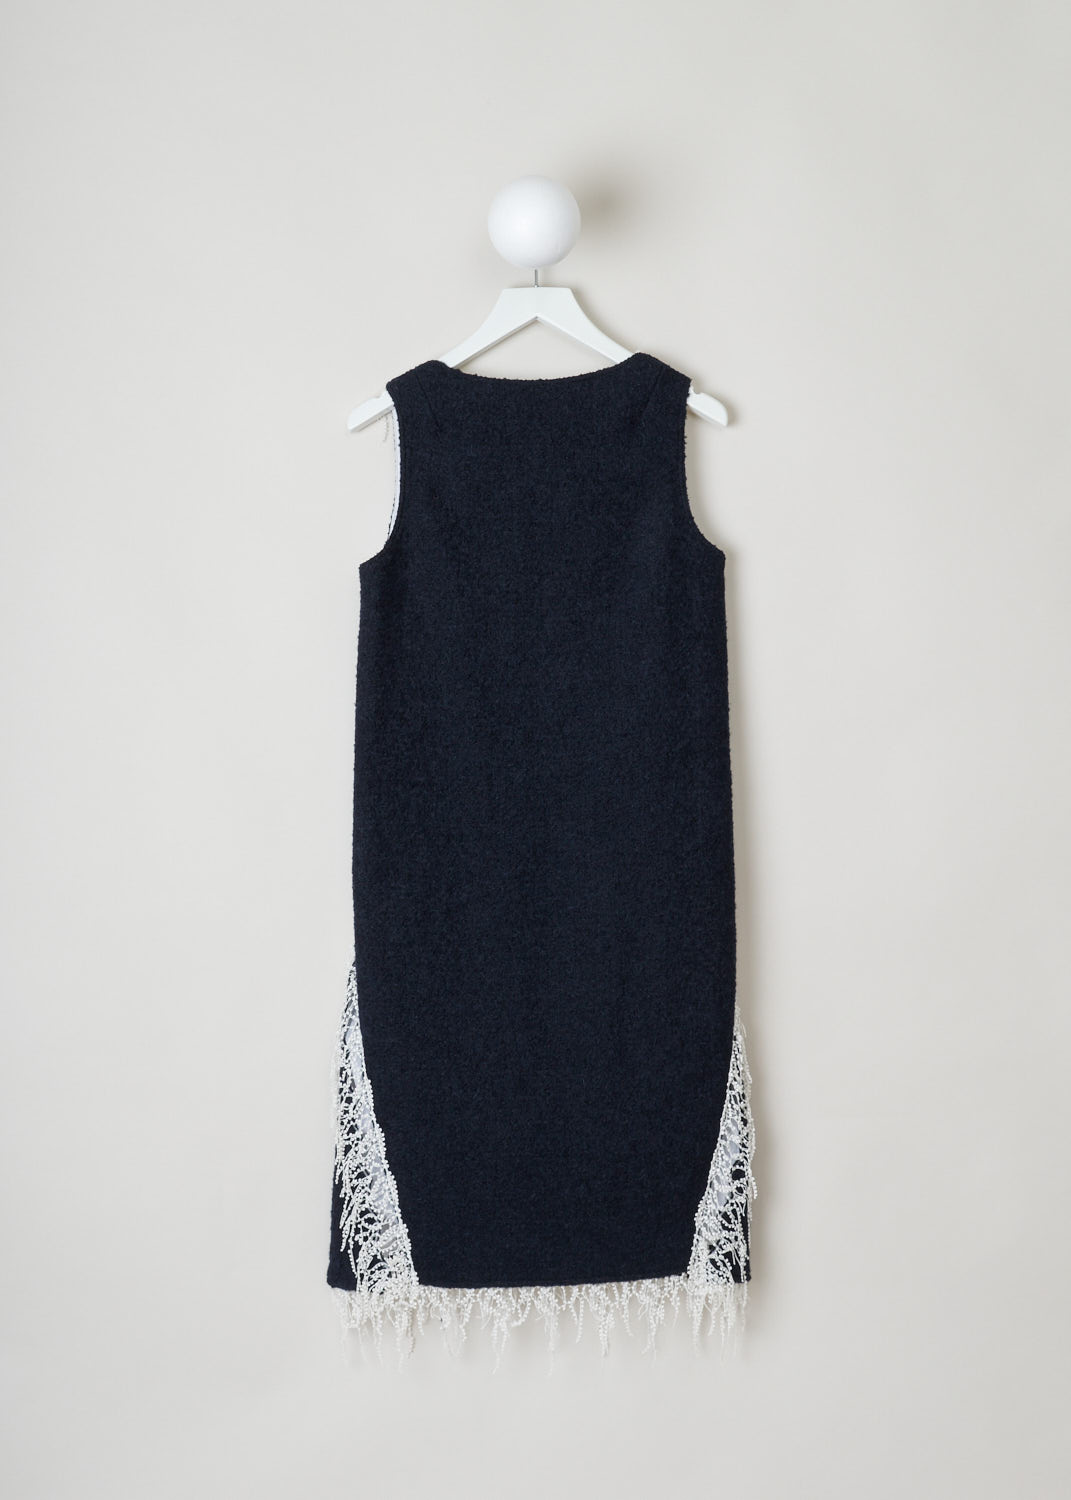 Calvin Klein 205w39nyc, Navy a-line dress with decorative neckline, 84WWDE52_W220_416, black, back, A-line dress crafted of a navy bouclÃ© wool. Featuring a V-neckline and open laser-cut seams and white trims. Furthermore, the dress has a knee length and a concealed zipper on the left side.